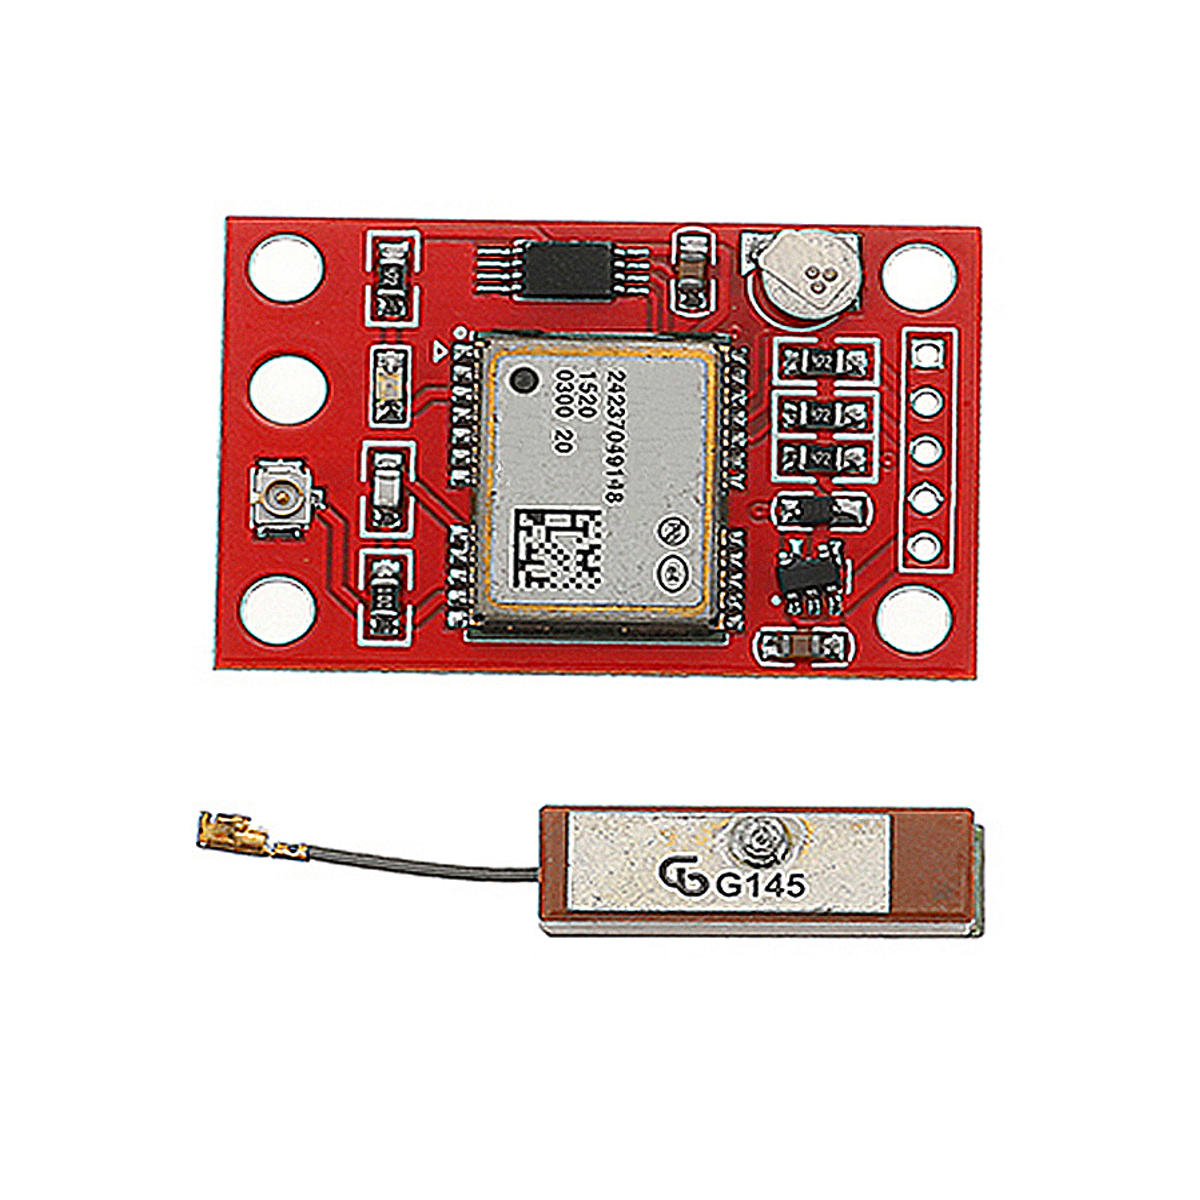 3Pcs GY GPS Module Board 9600 Baud Rate With Antenna Geekcreit for Arduino - products that work with official Arduino bo